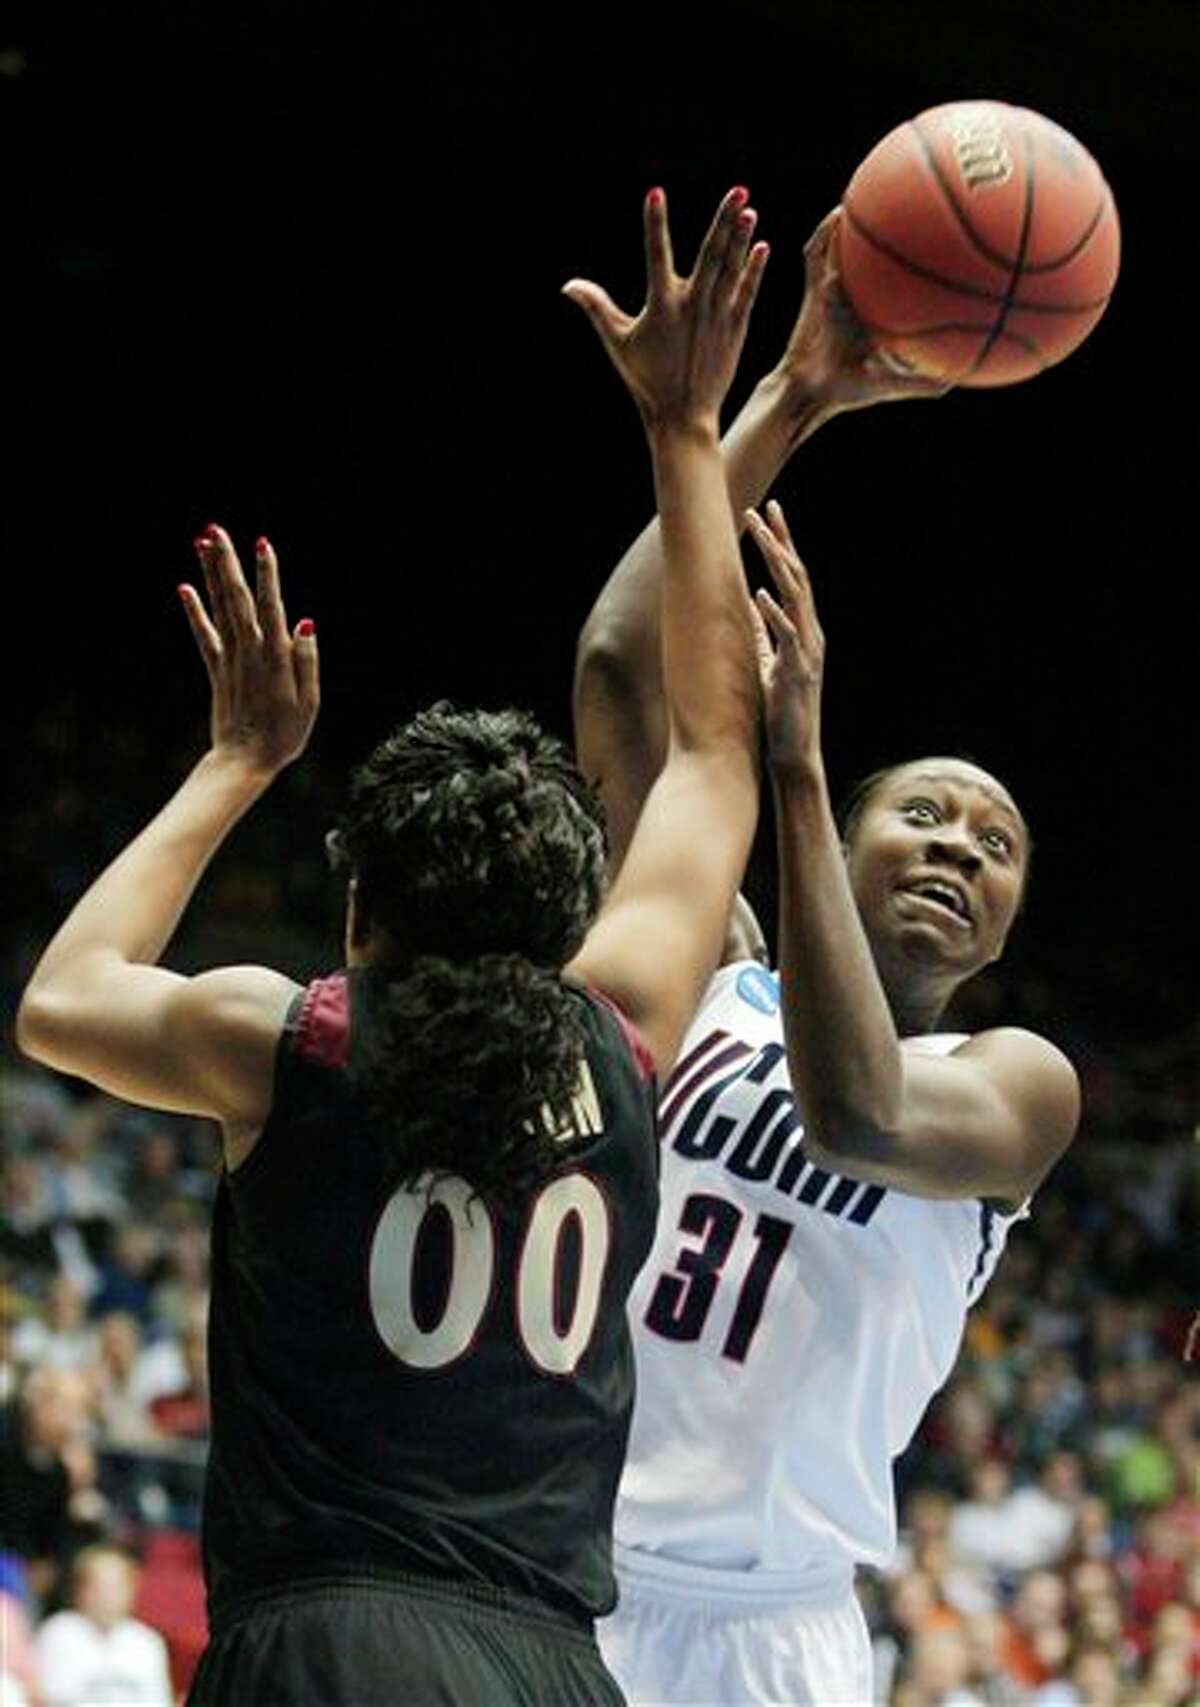 Connecticut's Tina Charles (31) shoots over Florida State's Chasity Clayton (00) in the first half of the NCAA Dayton Regional final college basketball game Tuesday, March 30, 2010, in Dayton, Ohio. (AP Photo/Skip Peterson)